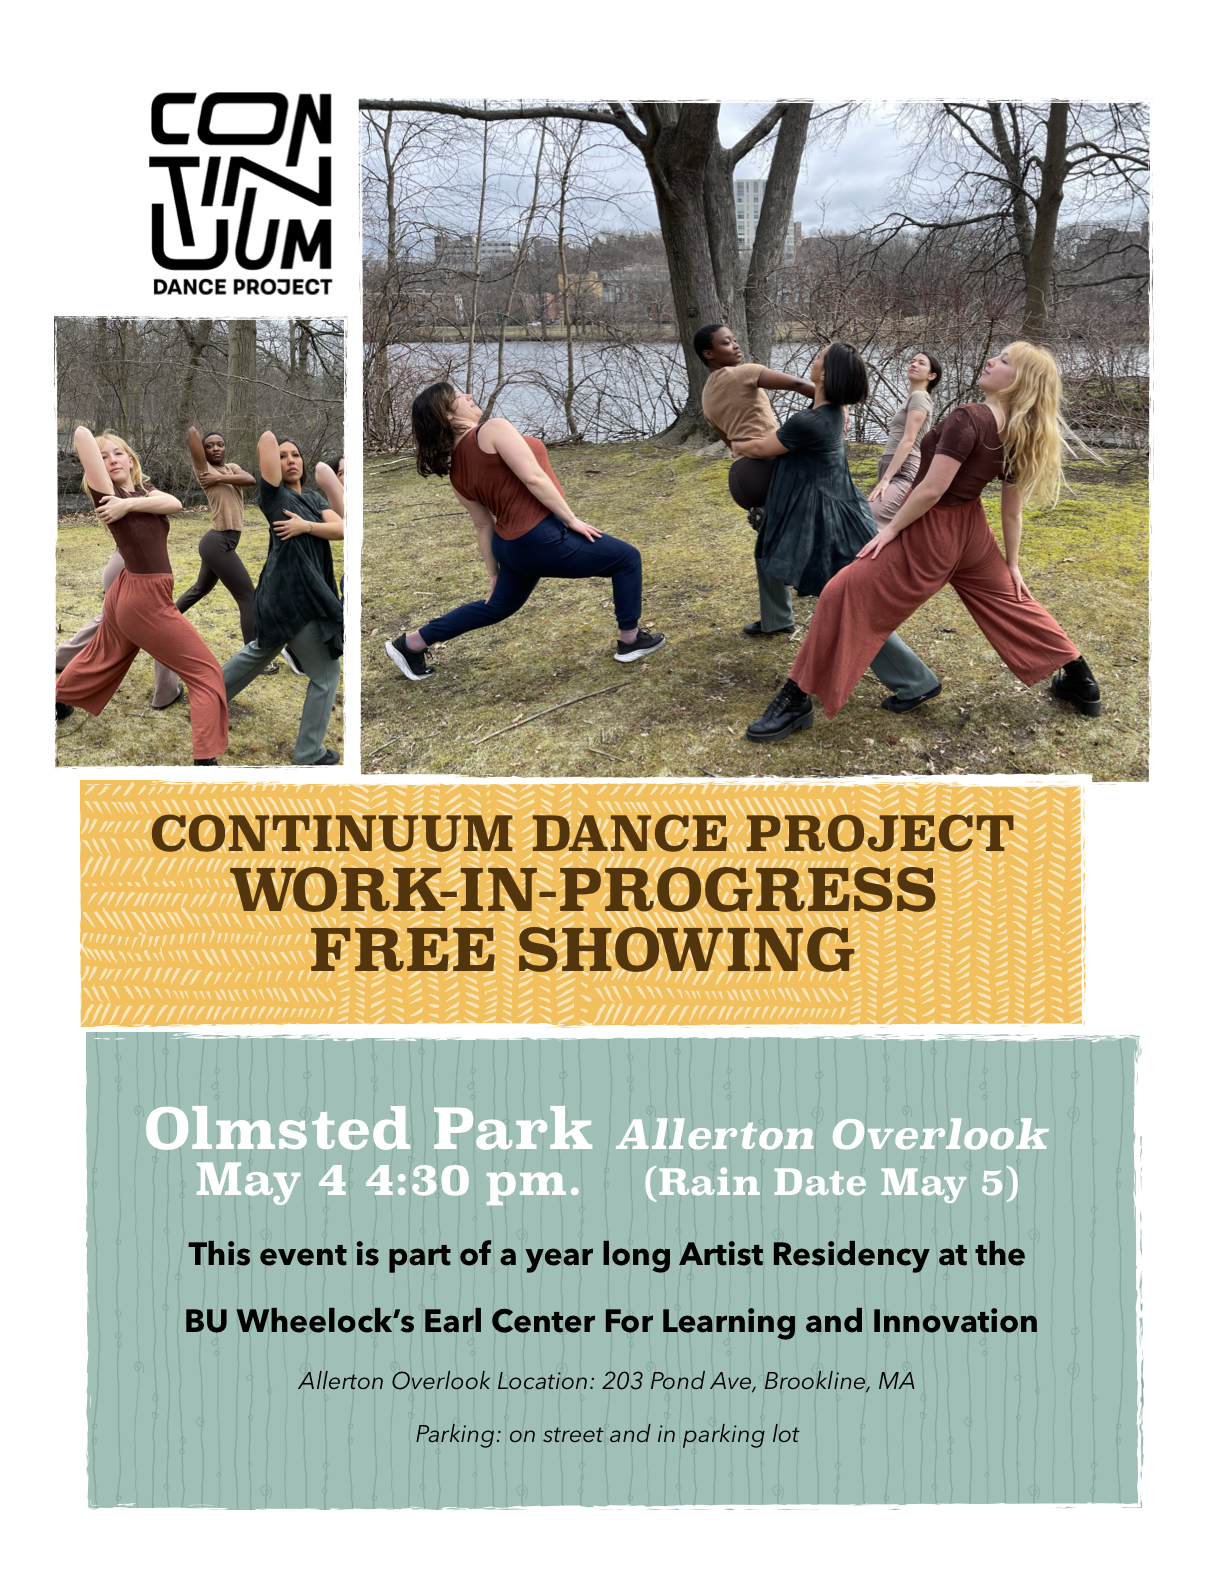 Continuum Dance Project's flyer with event information at the bottom and two photos of company dancing outdoors.